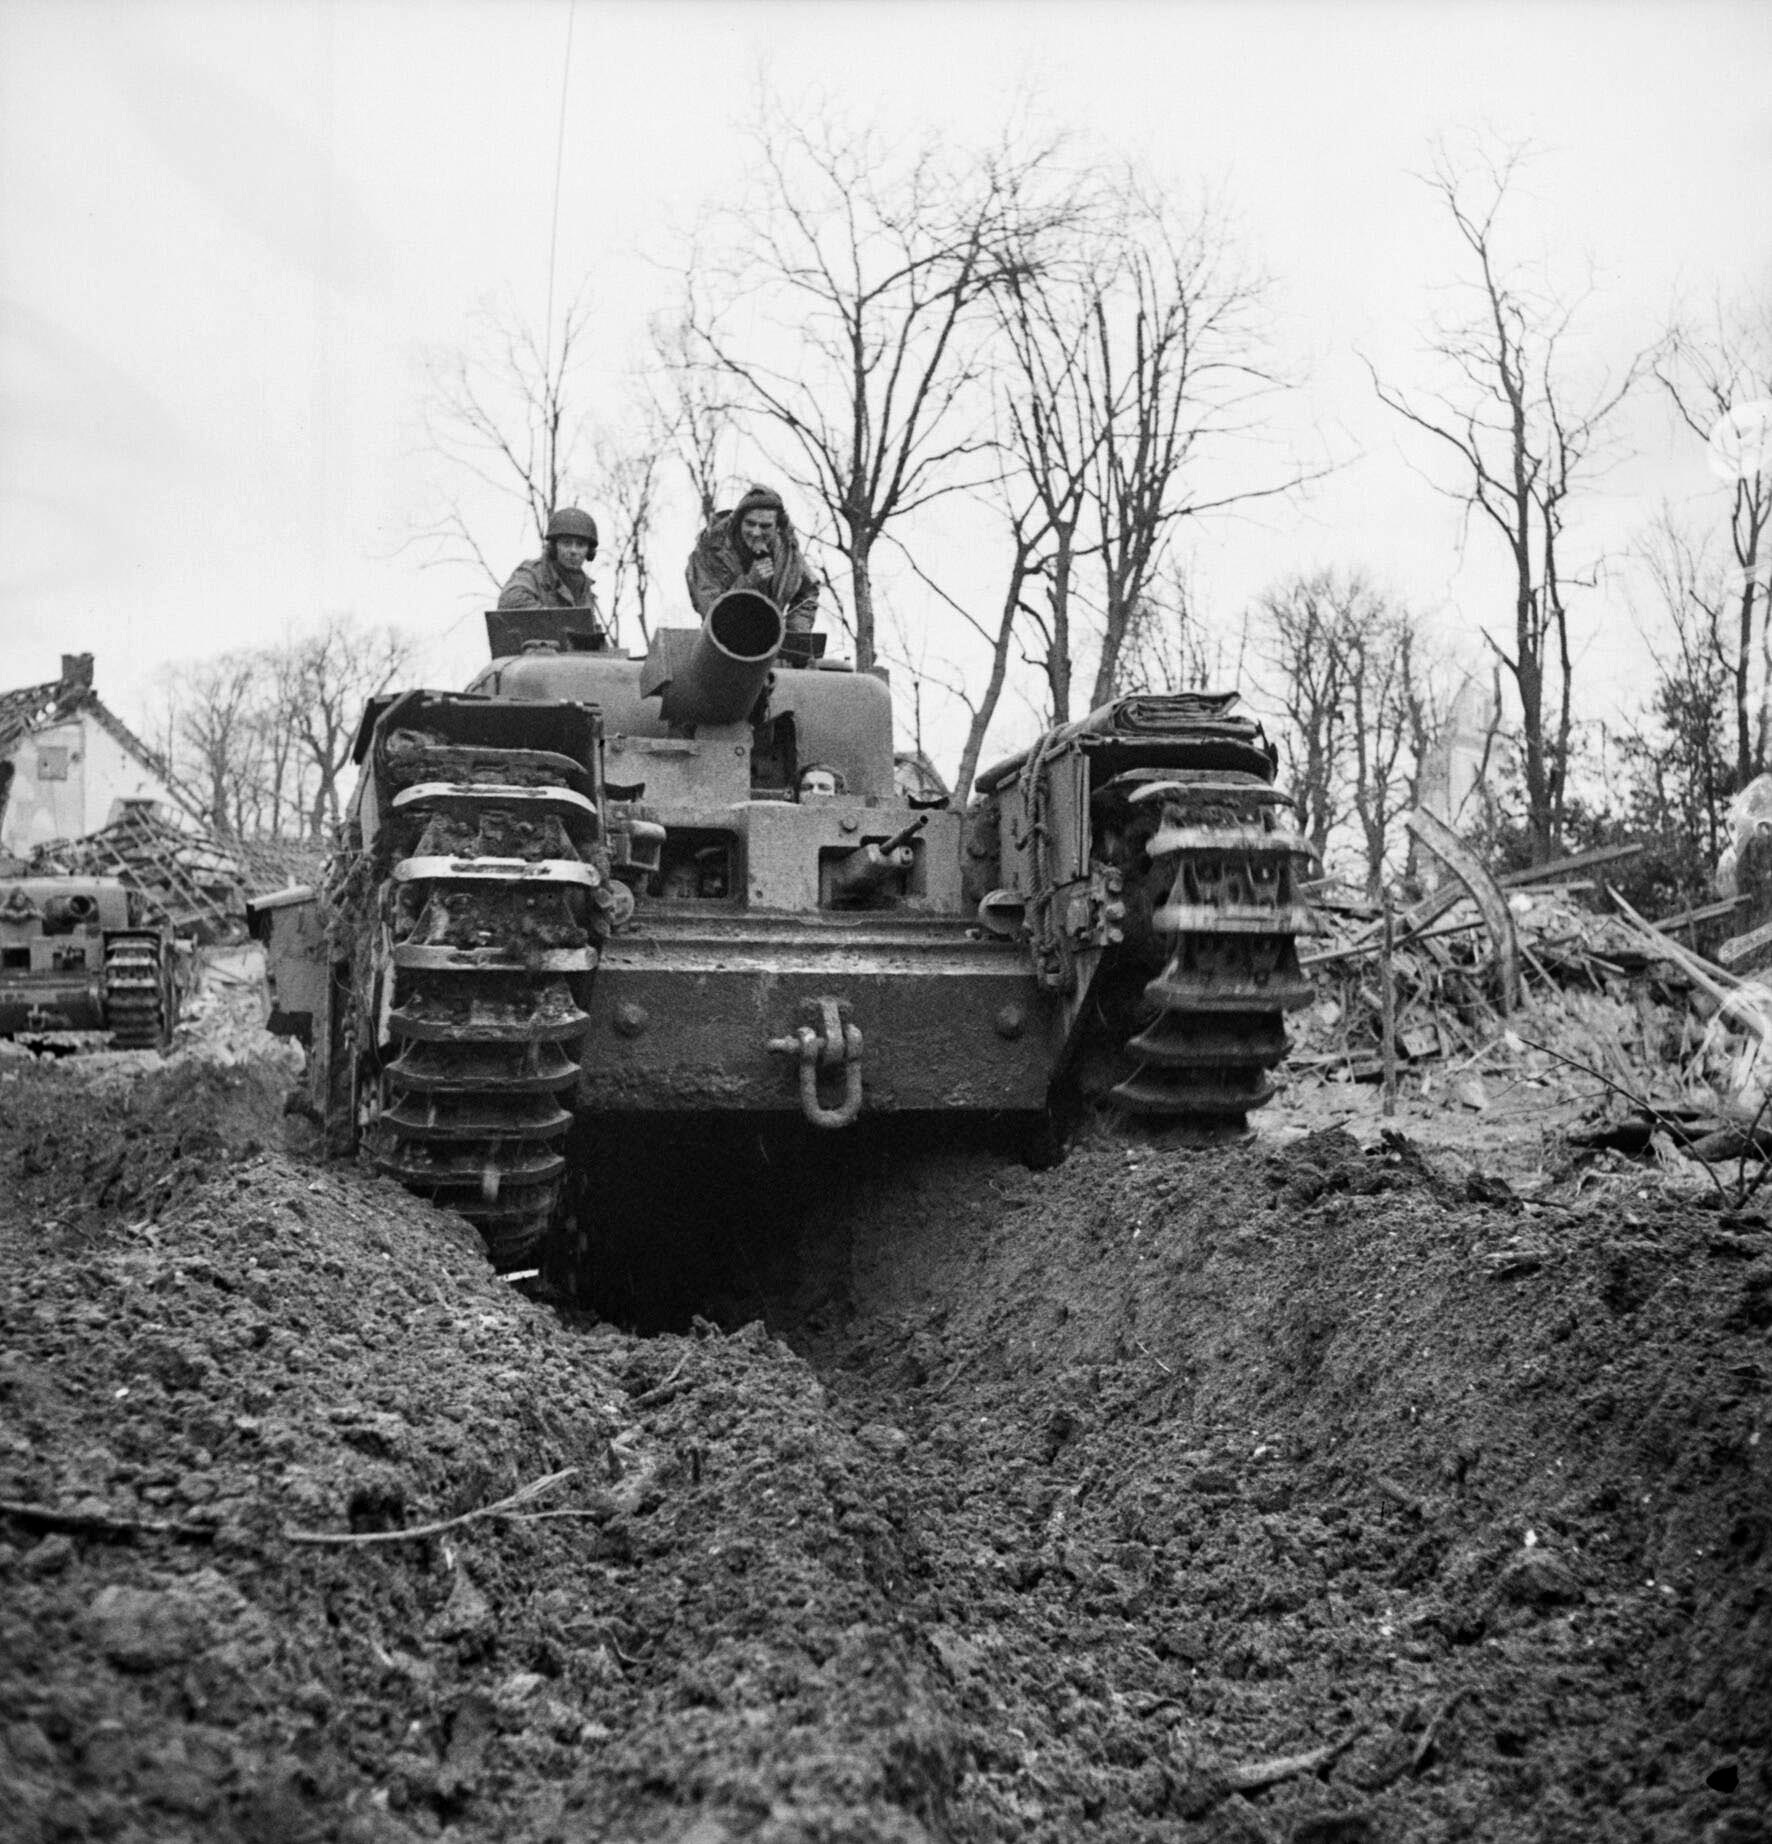 A Churchill AVRE tank armed with a heavy spigot mortar grinds forward through the mud near Cleve, February 12, 1945. 